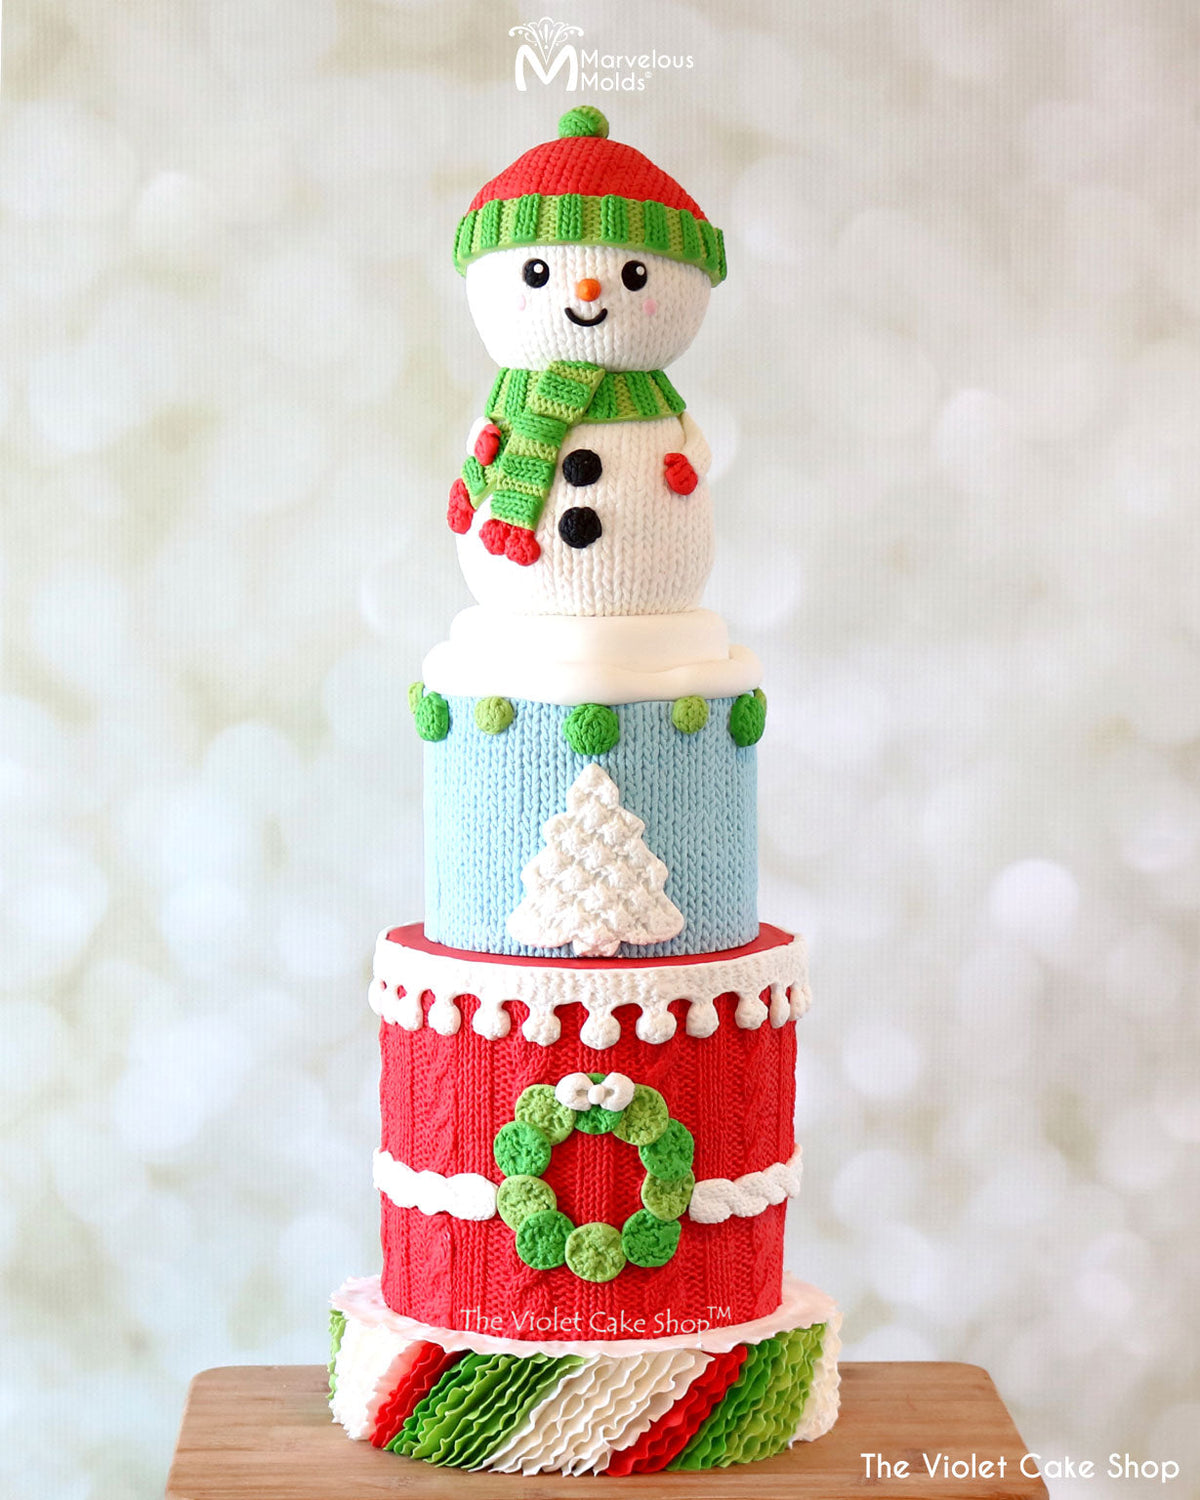 Snowman Knit Cake Decorated with Marvelous Molds Medium Knit Buttons Silicone Mold